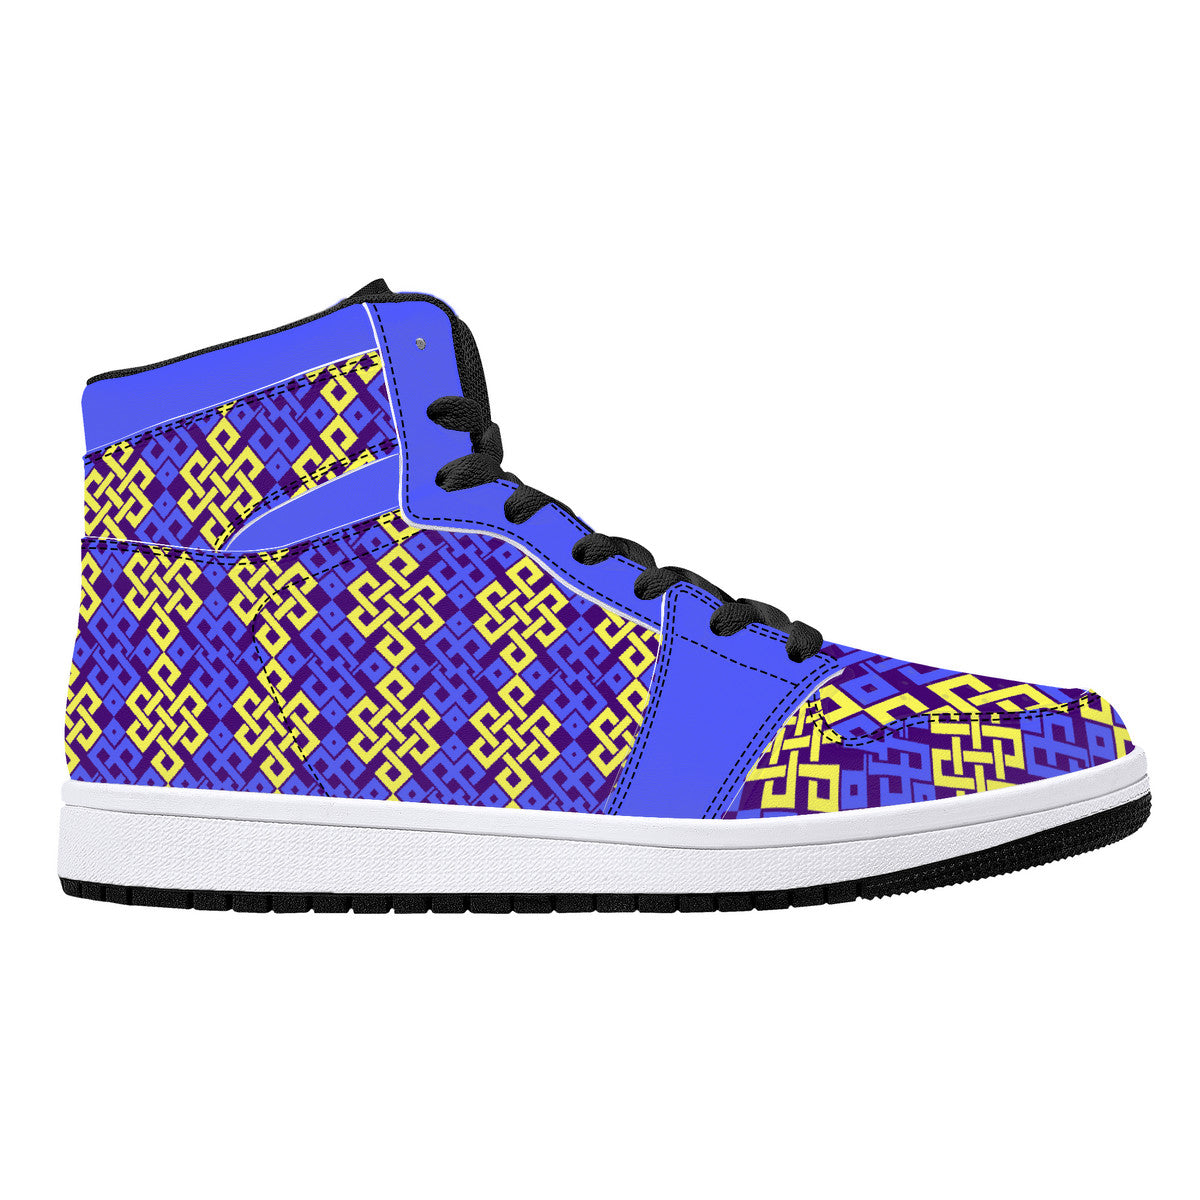 "Karma" High-Top Synthetic Leather Sneakers